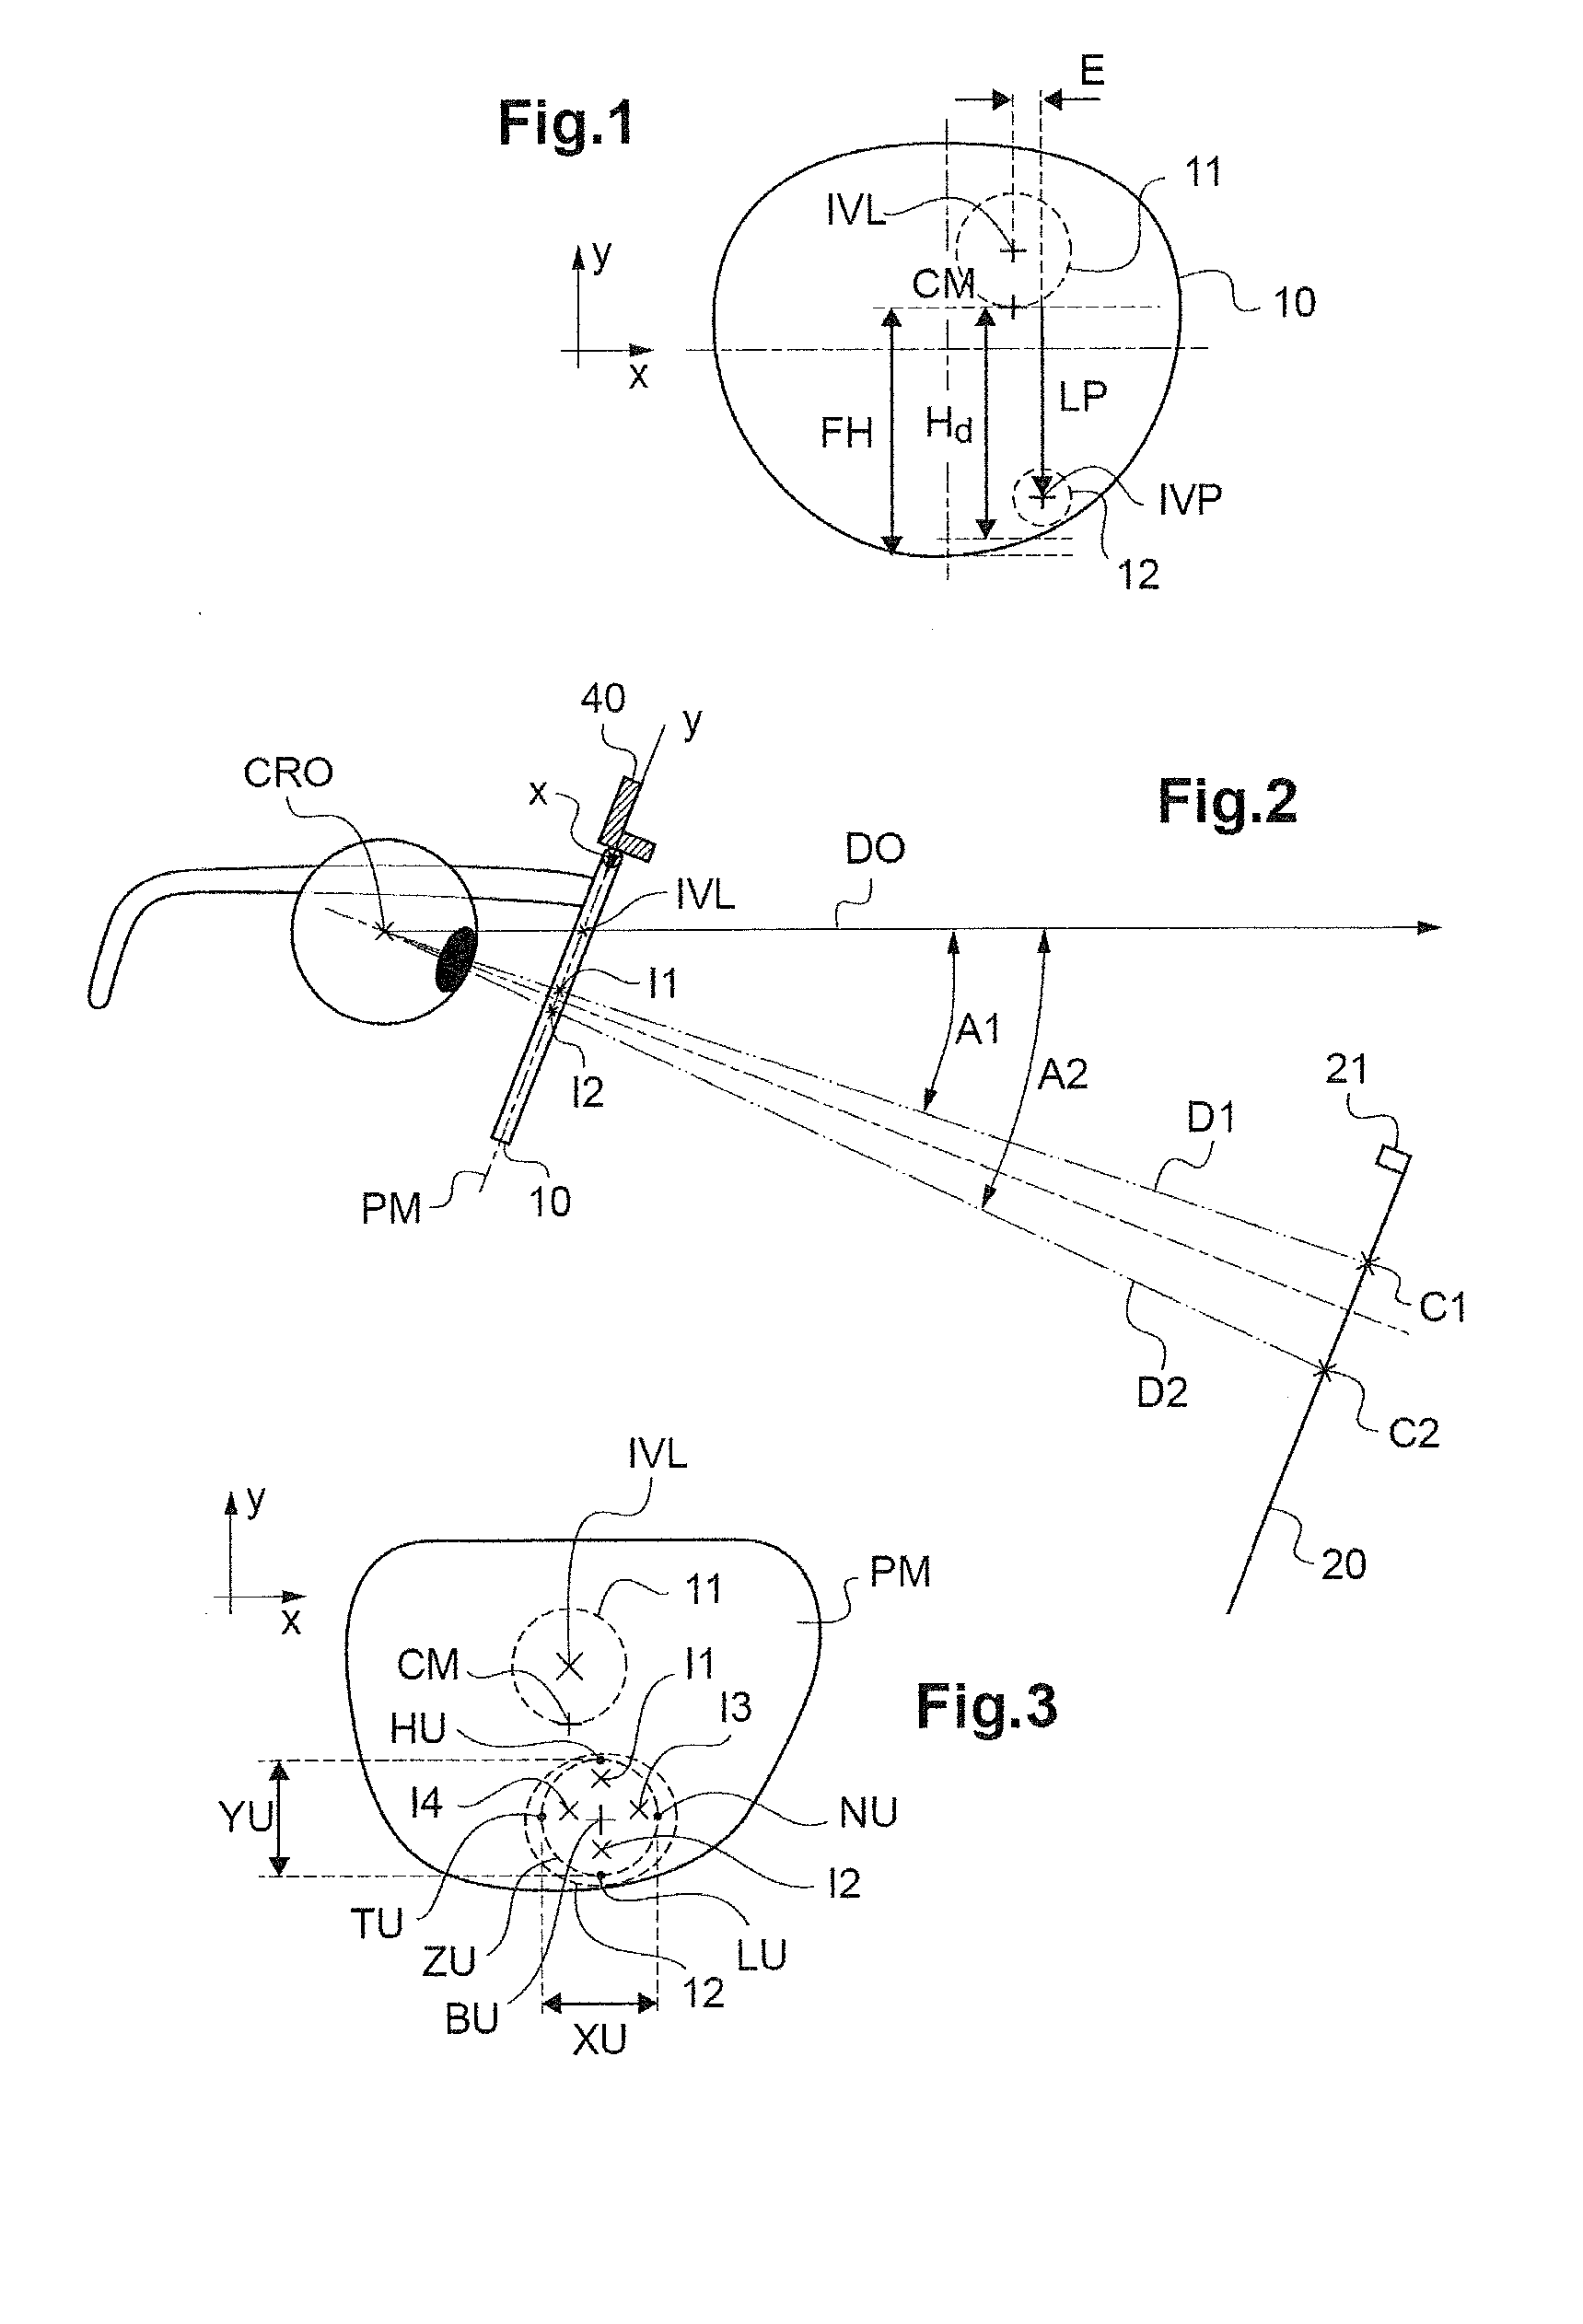 Method For Determining At Least One Optical Design Parameter For A Progressive Ophthalmic Lens